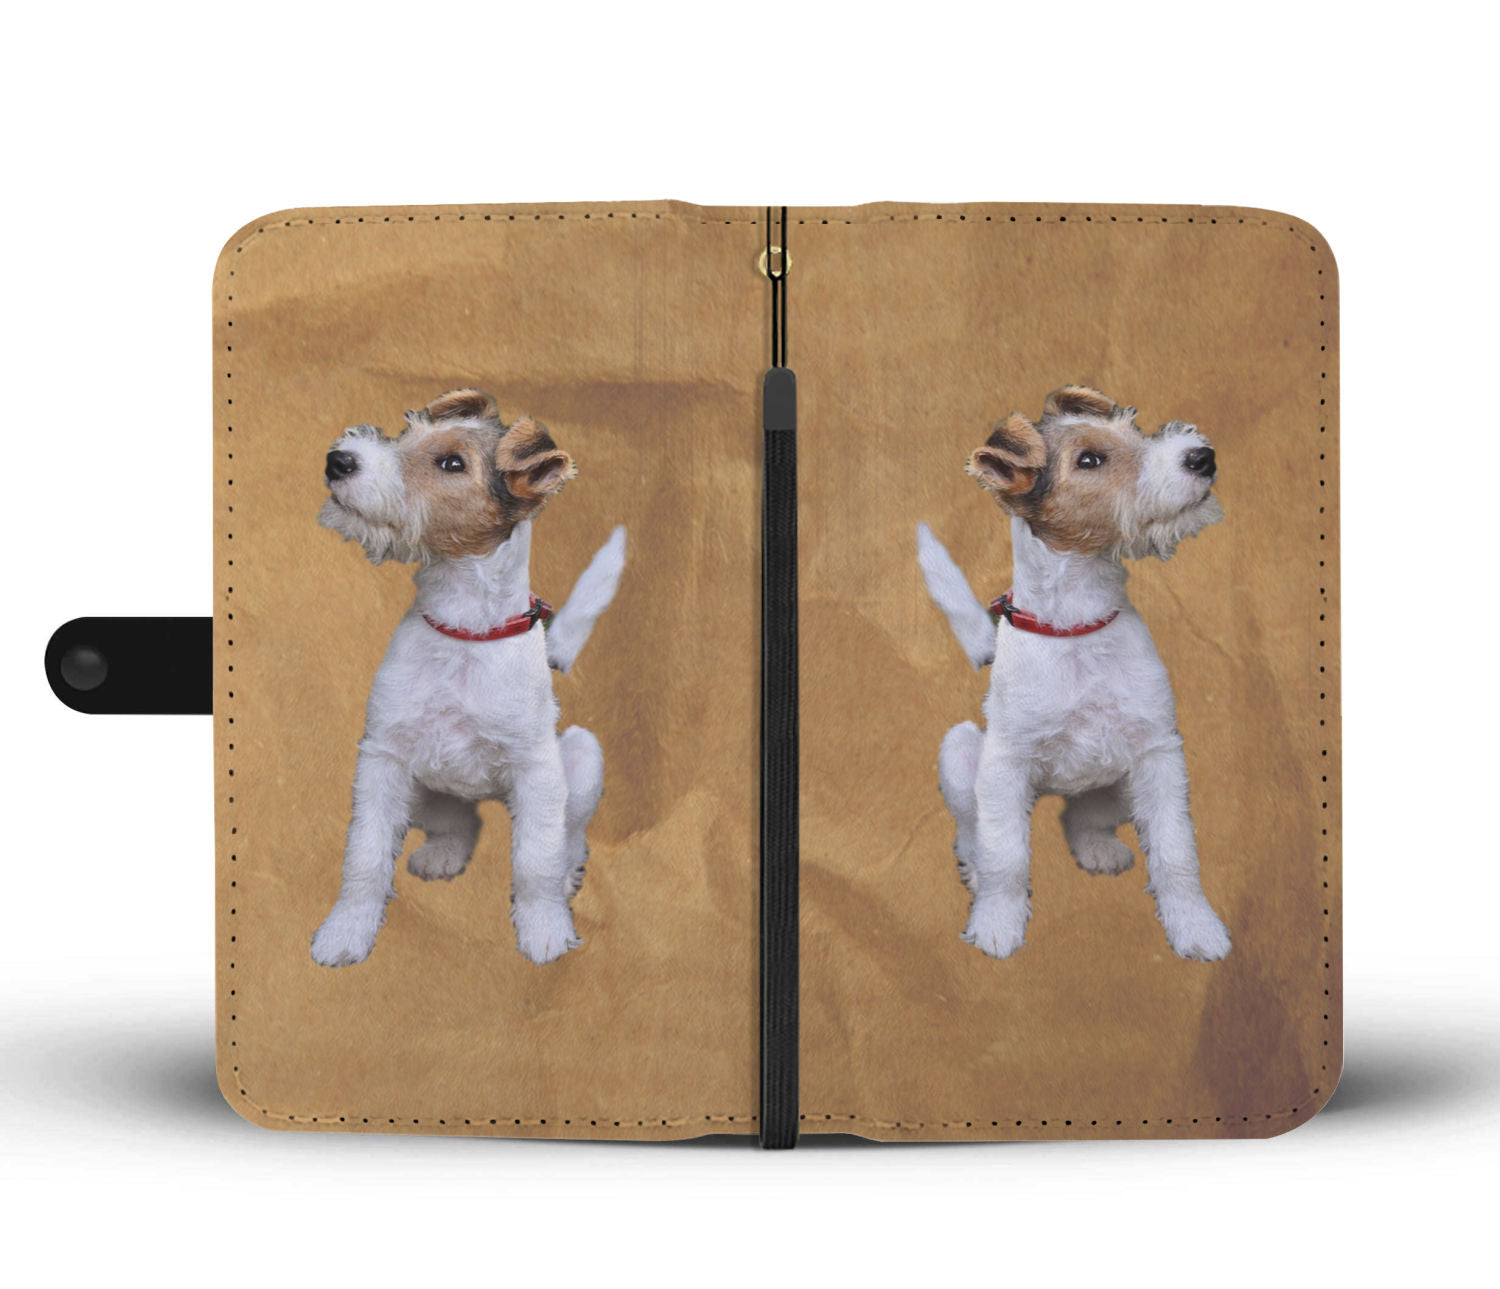 Wire Haired Fox Terrier Dog Inspired Denim Style Throw Pillow - Travel  collection, Wire Haired Fox Terrier dog Inspired Denim Style Throw Pillow -  Travel collection